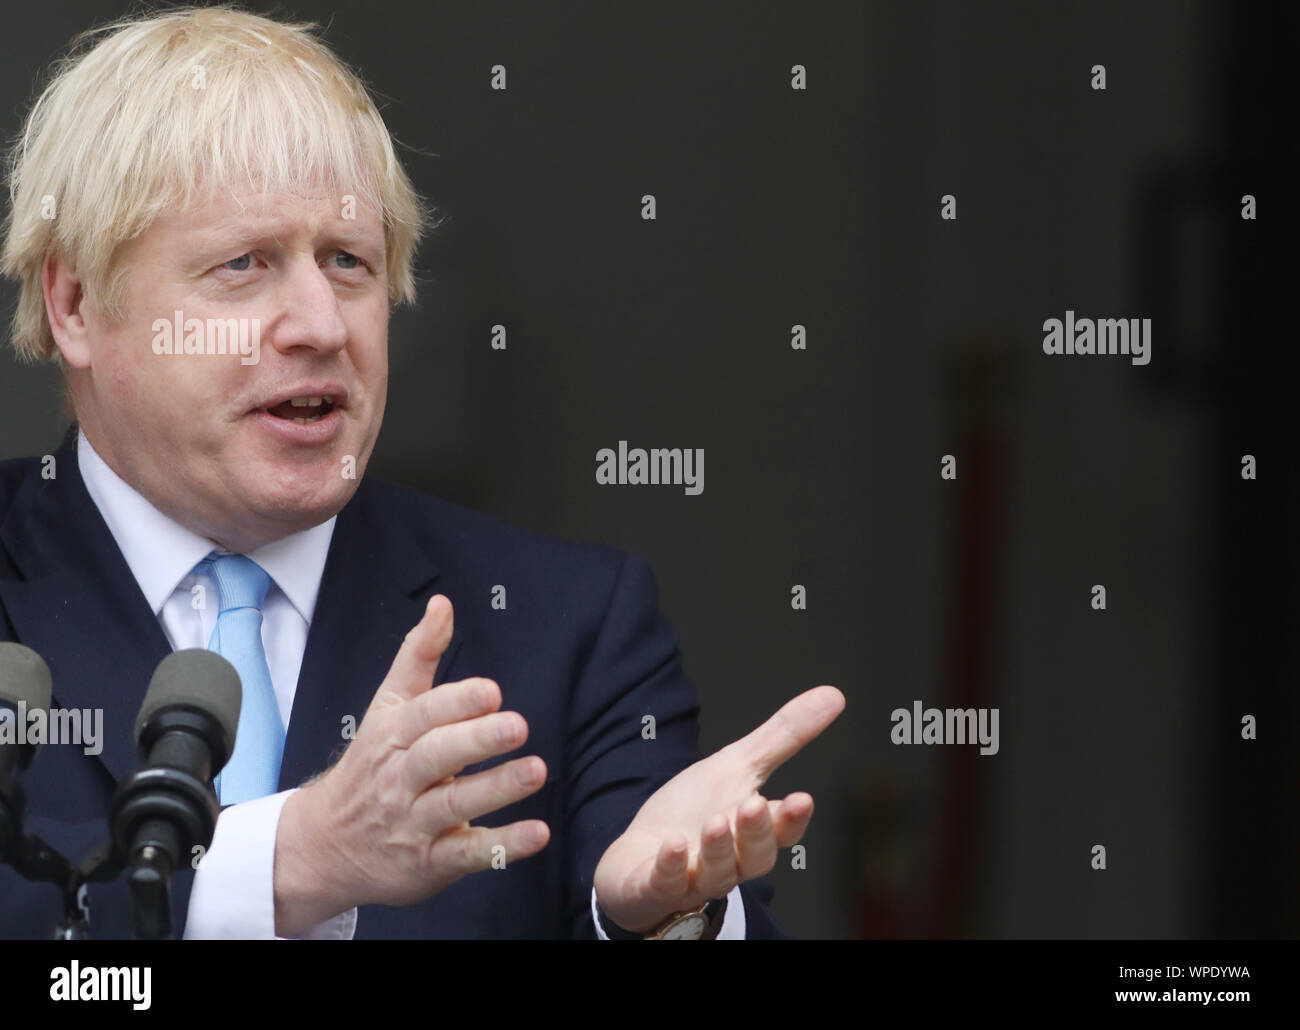 Dublin, Ireland. 9th Sep, 2019. Boris Johnson In Dublin For Brexit Talks. British Prime Minister Boris Johnson meeting the Taoiseach at Government Buildings in Dublin. They are both going to talk about the Northern Ireland Border problem and the Bexit Crisis. Photo: Leah Farrell/RollingNews.ie Credit: RollingNews.ie/Alamy Live News Stock Photo